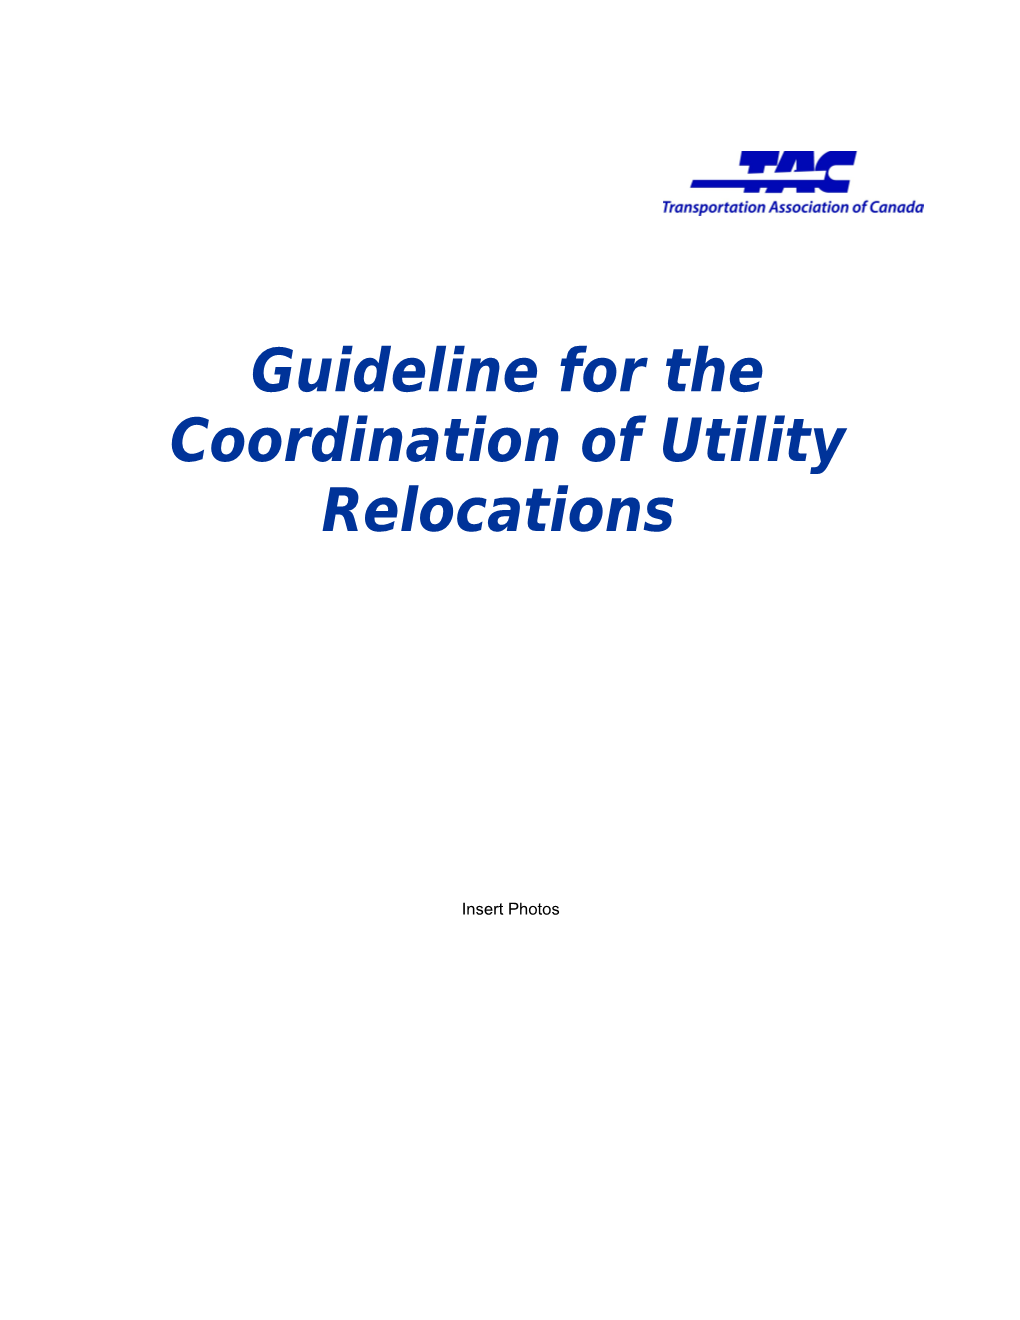 Guideline for the Coordination of Utility Relocations